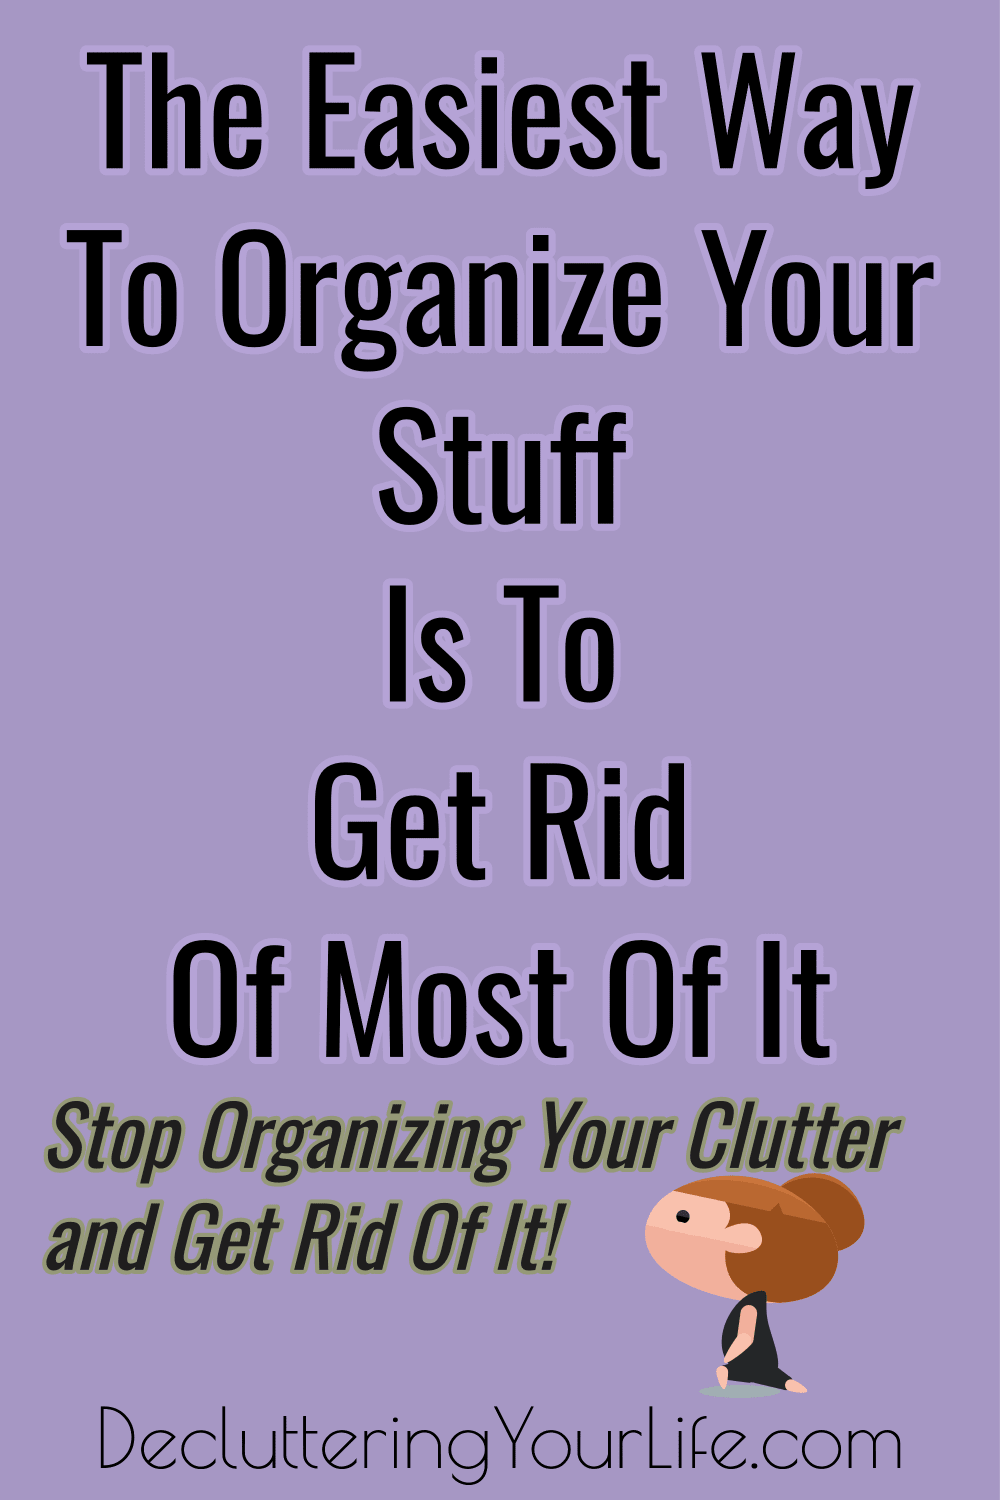 Decluttering Mistakes - Organizing Clutter. Decluttering your home is about getting RID of clutter - stop organizing it and get rid of clutter first.